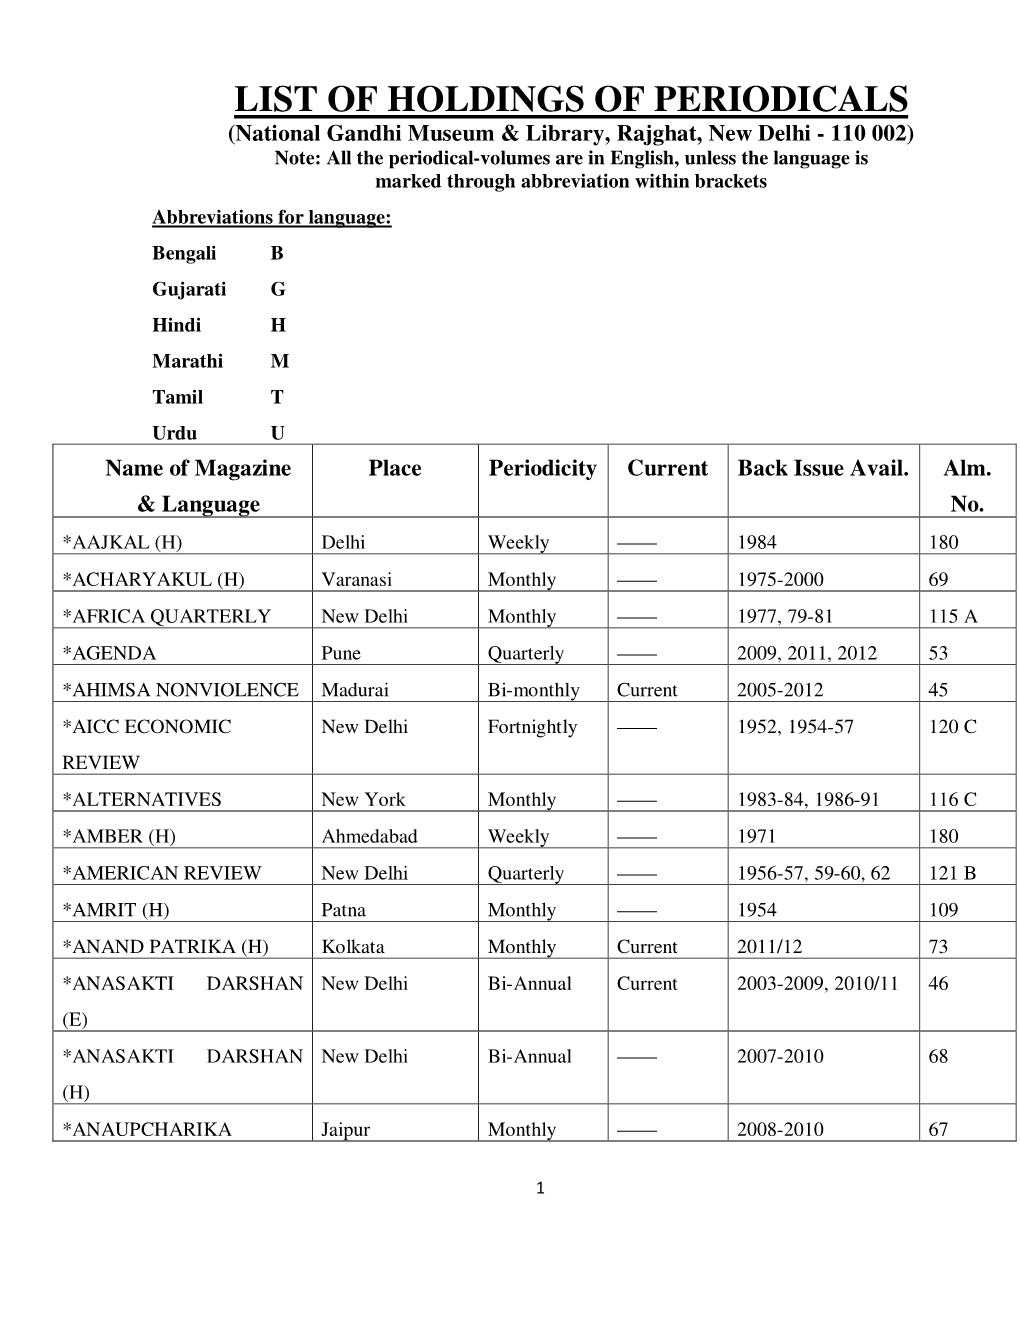 List of Holdings of Periodicals